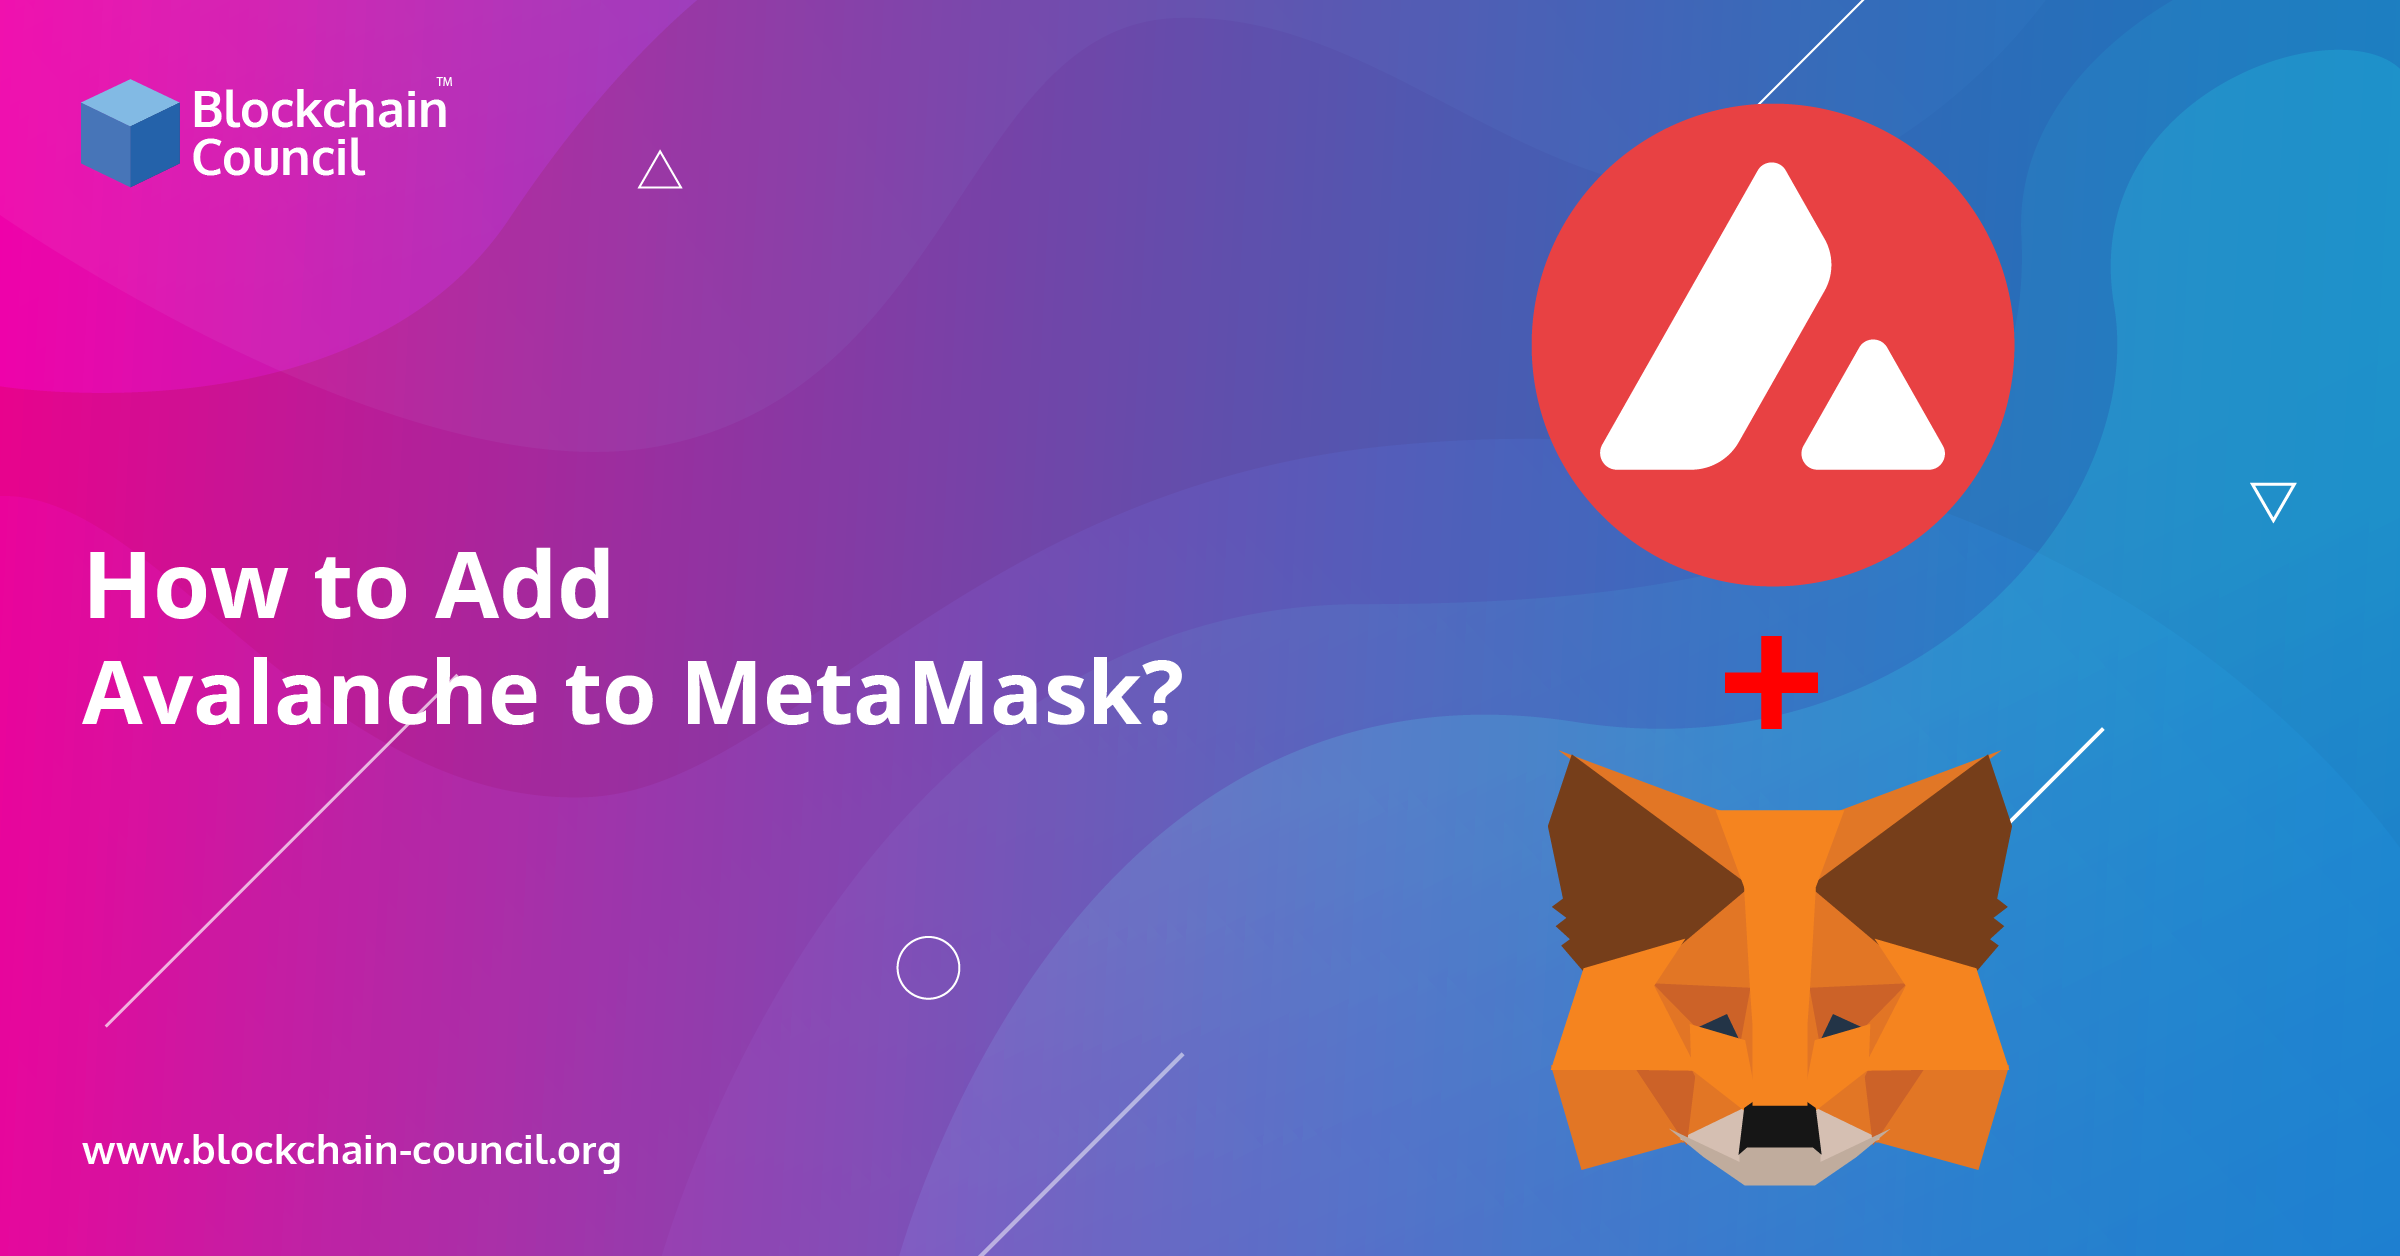 How to Add Avalanche to MetaMask?